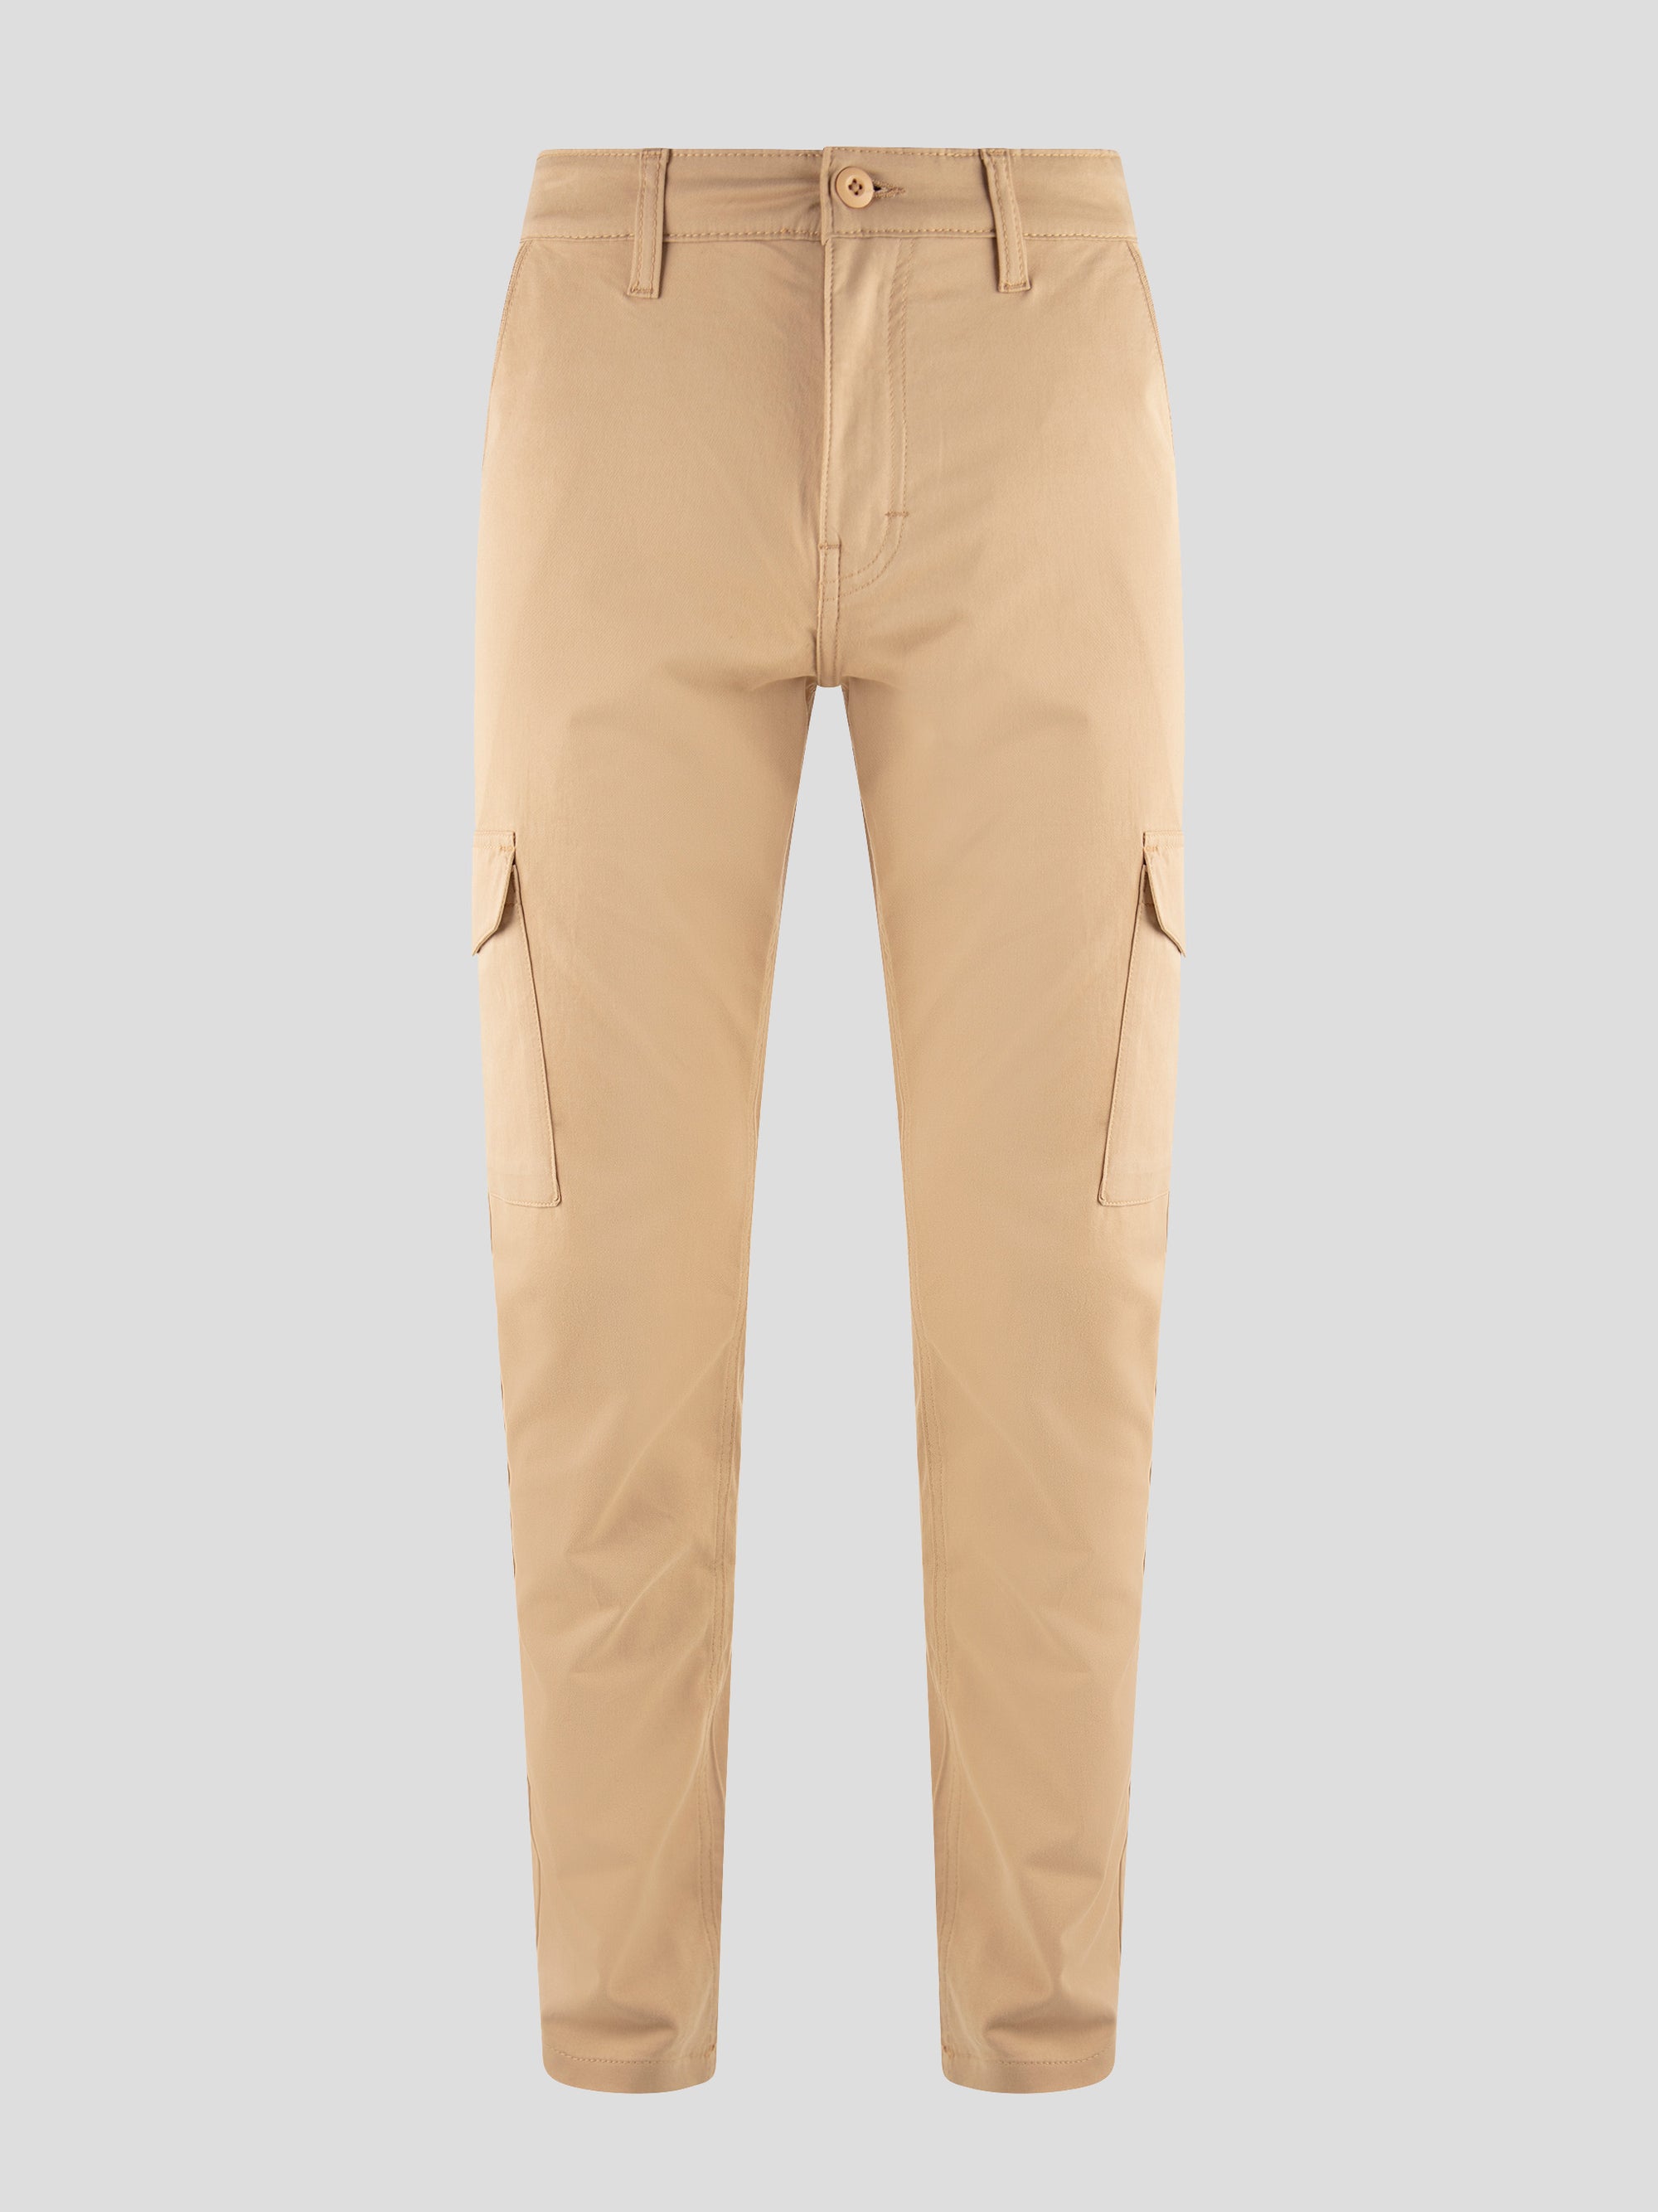 Tapered Fit Sahara Stone Cargo Pant